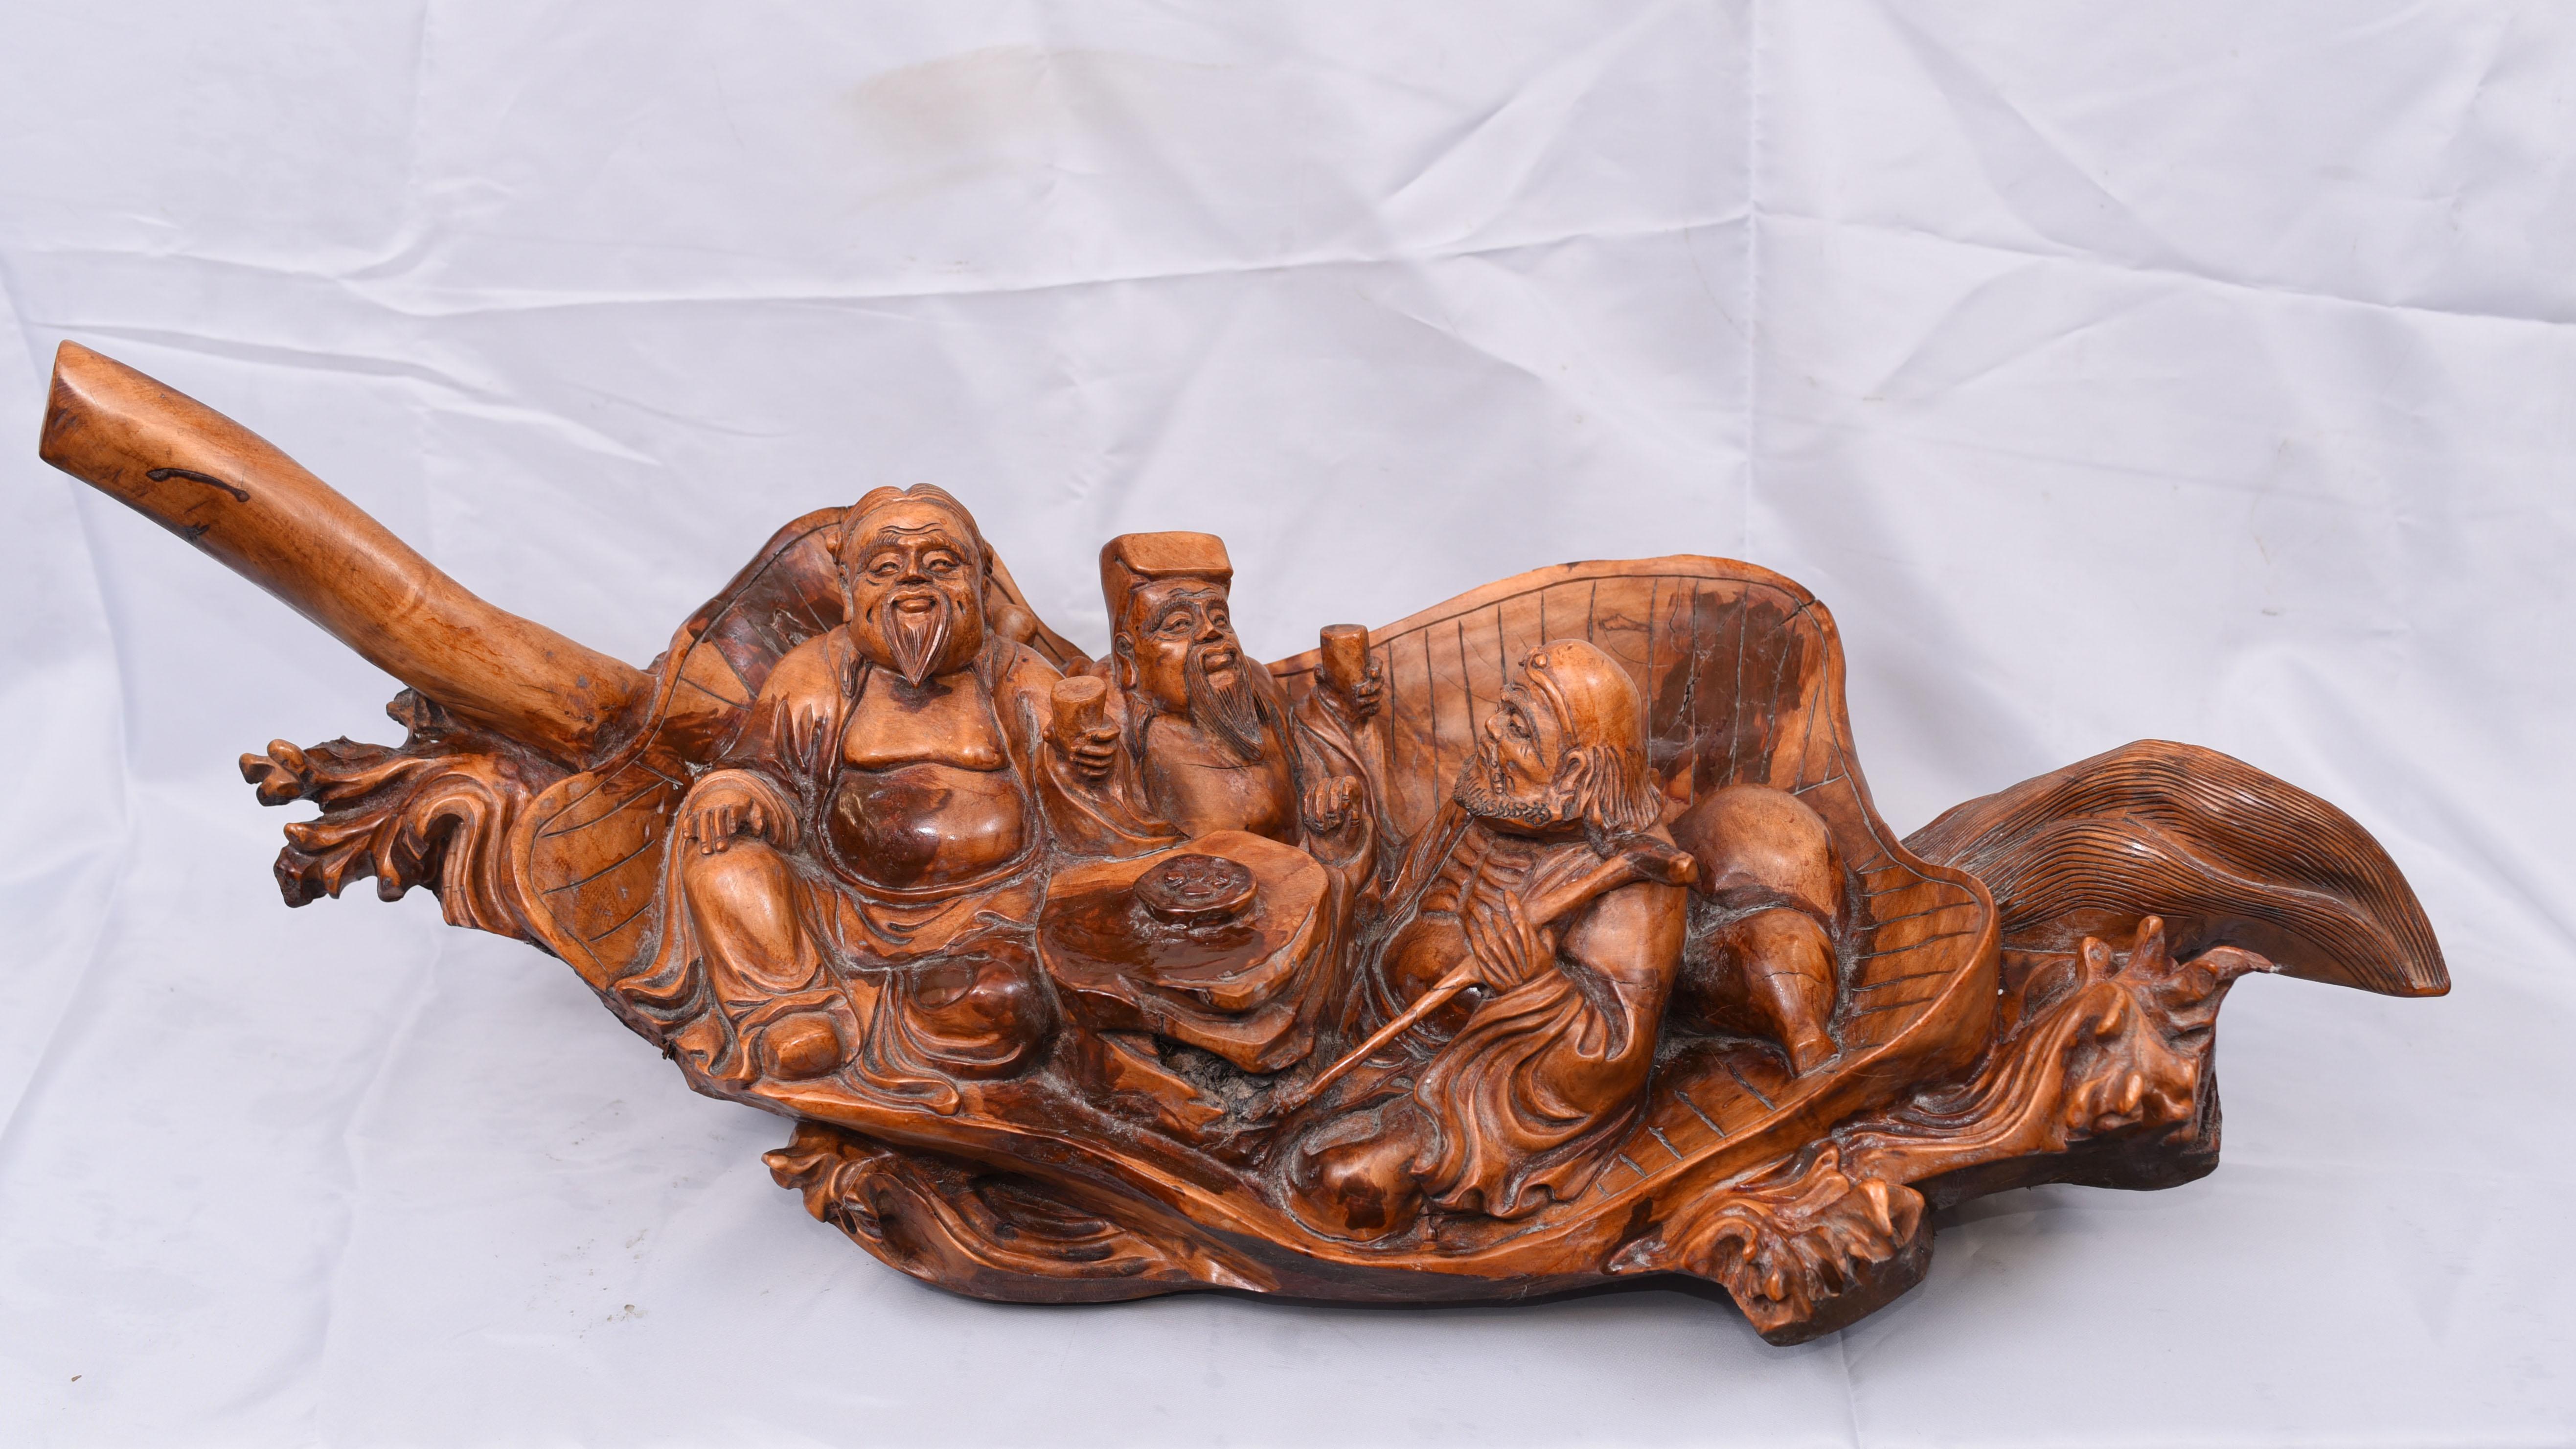 - Wonderful hand carved antique wise men statue.
- Circa 1900 on this piece showing three men carved from hardwood sitting in a leaf / boat.
- Great collectors piece and we are expecting a lot of interest.
- Viewings available by appointment